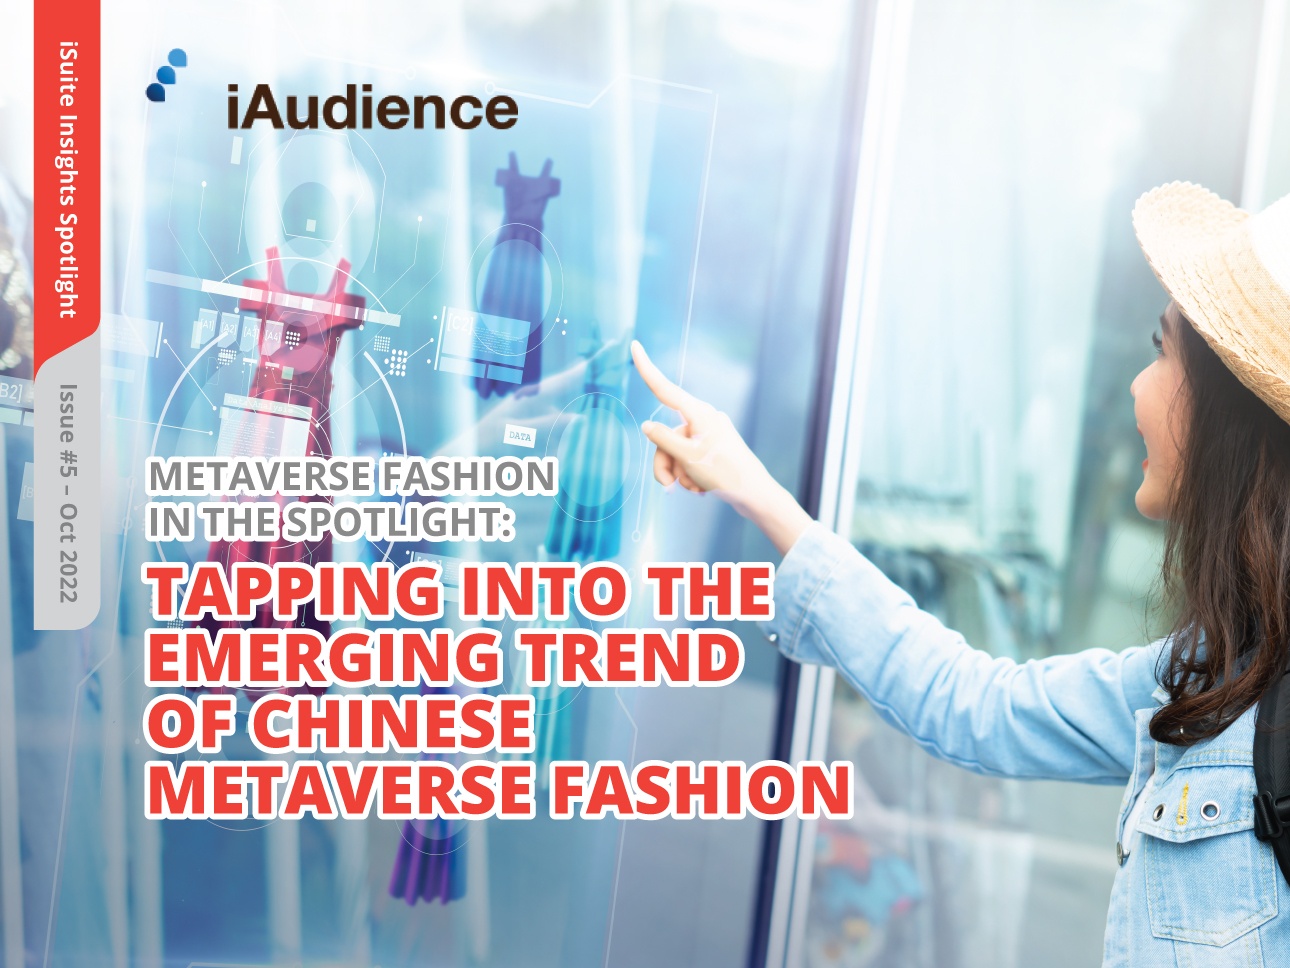 iSuite Insights Spotlight – Issue #5 Tapping into the Emerging Trend of Chinese Metaverse Fashion Through iAudience